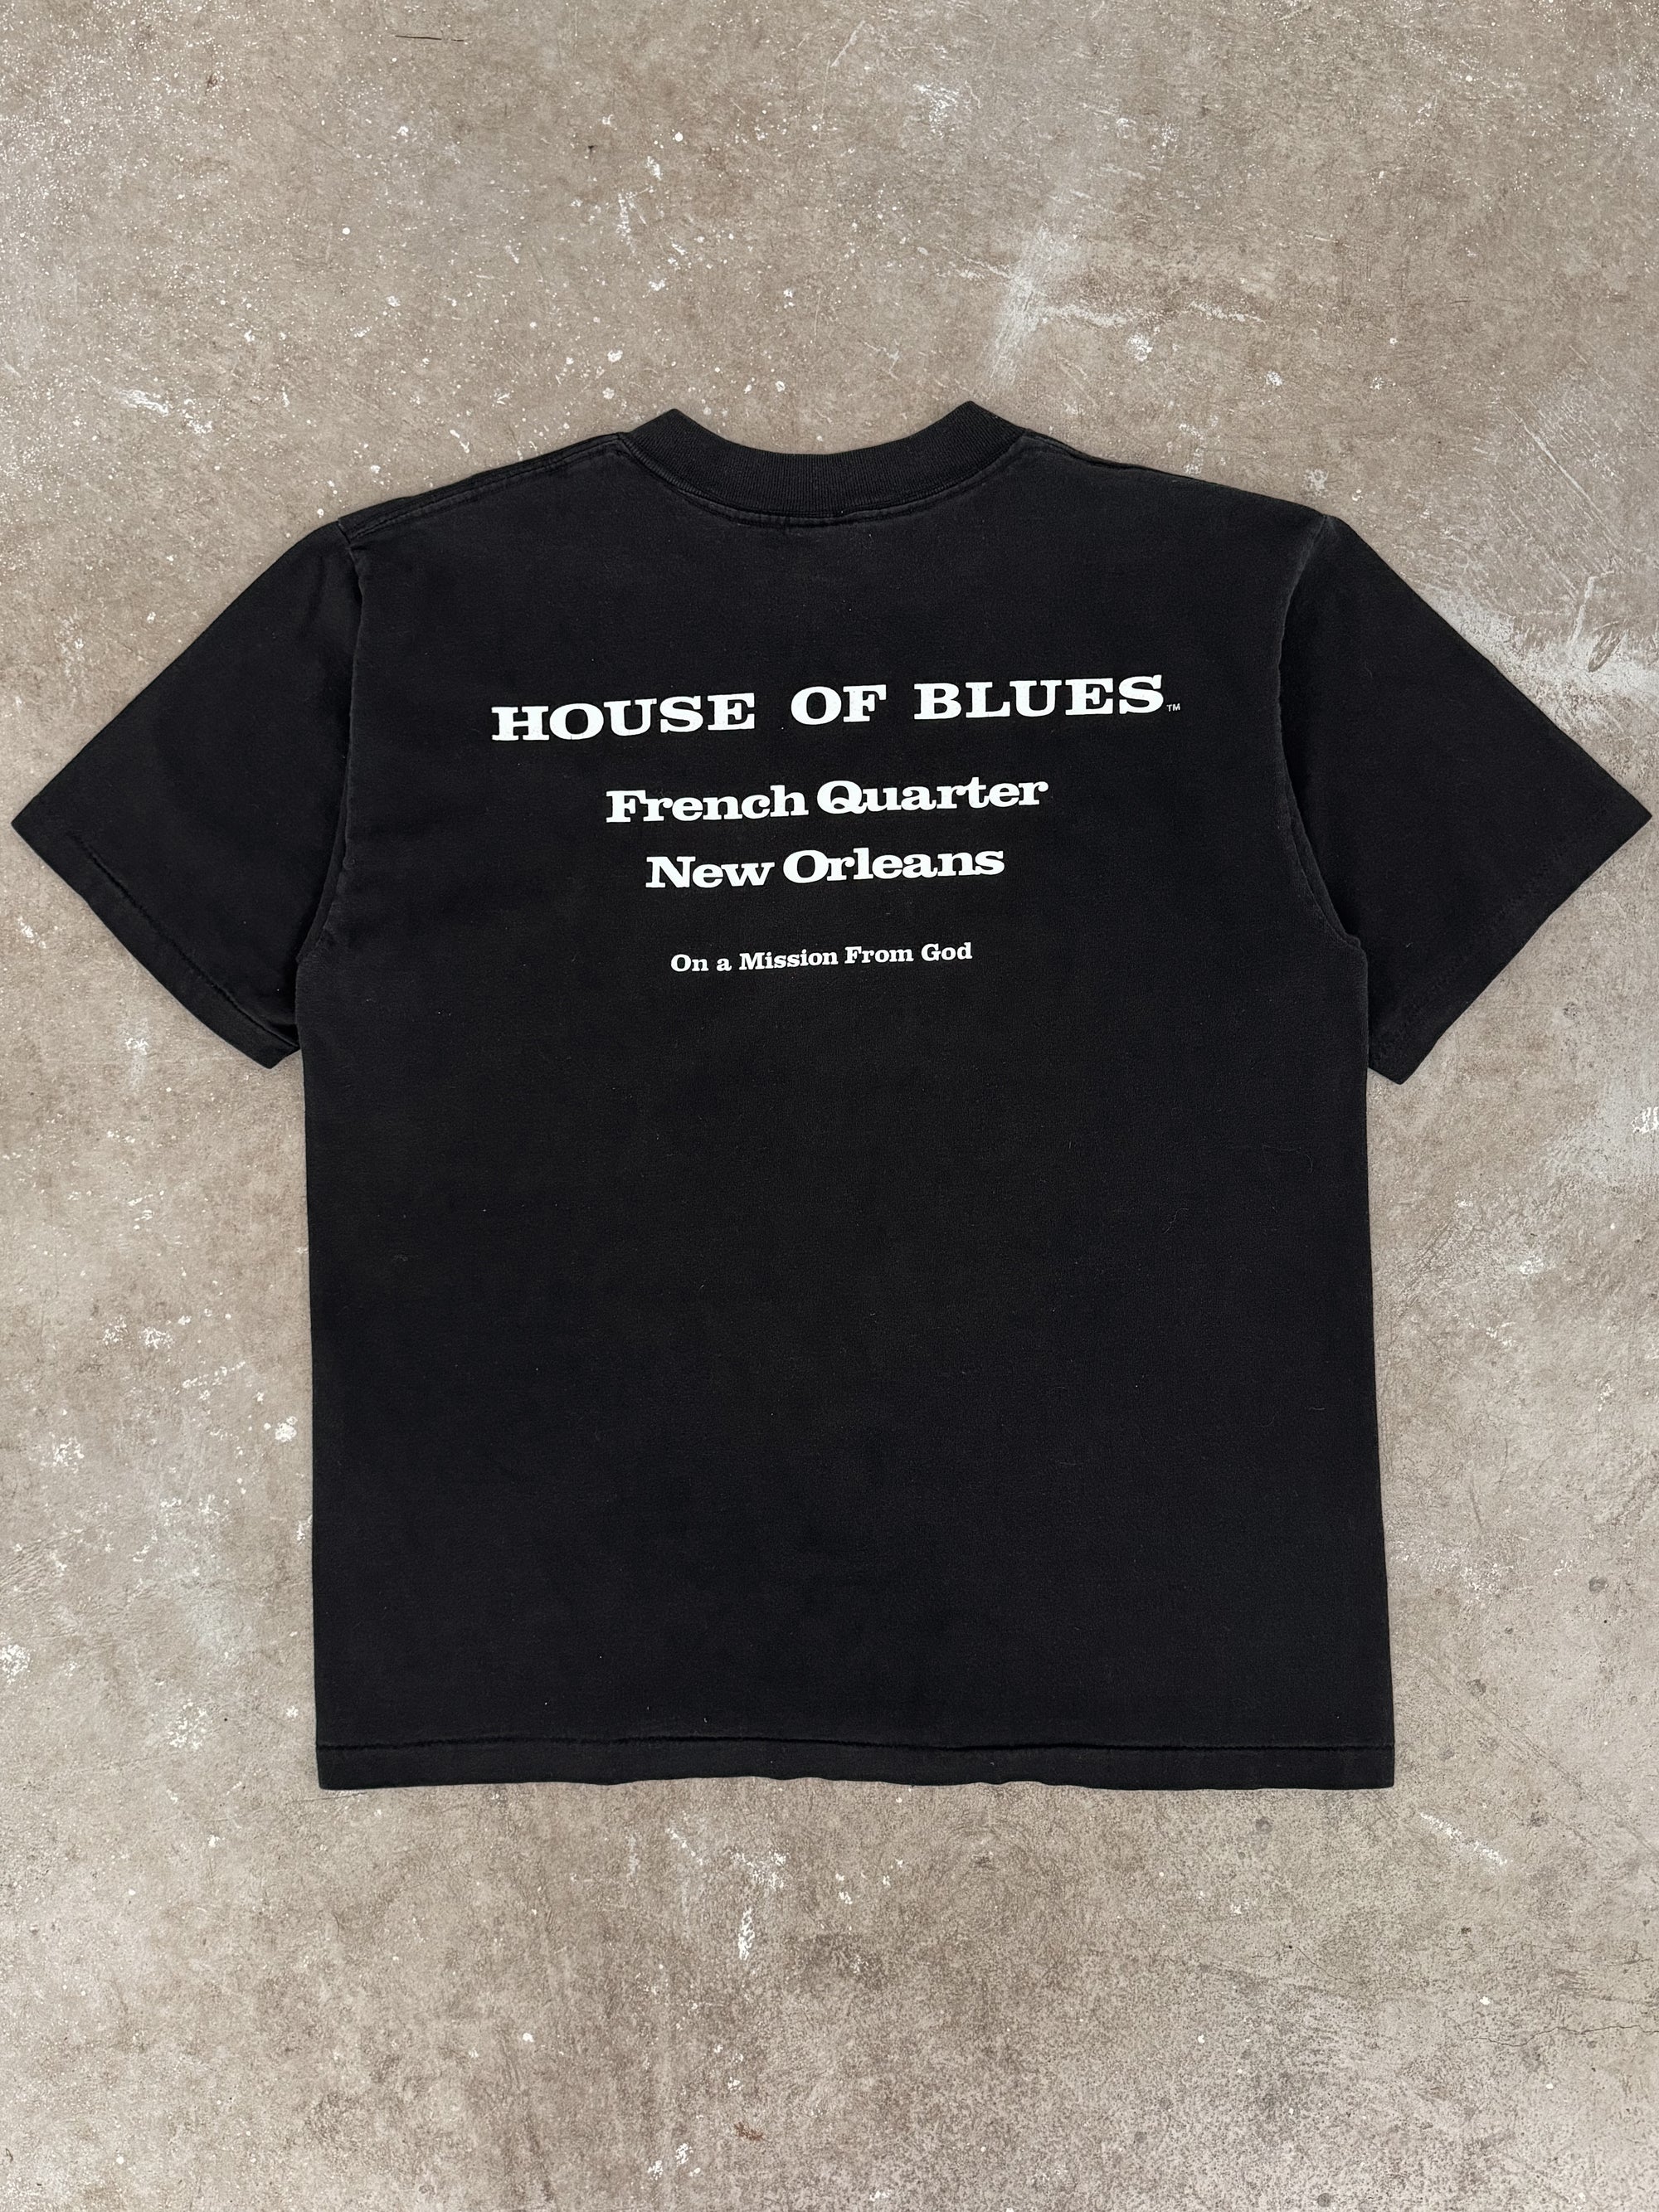 1990s "House of Blues" Tee (L)